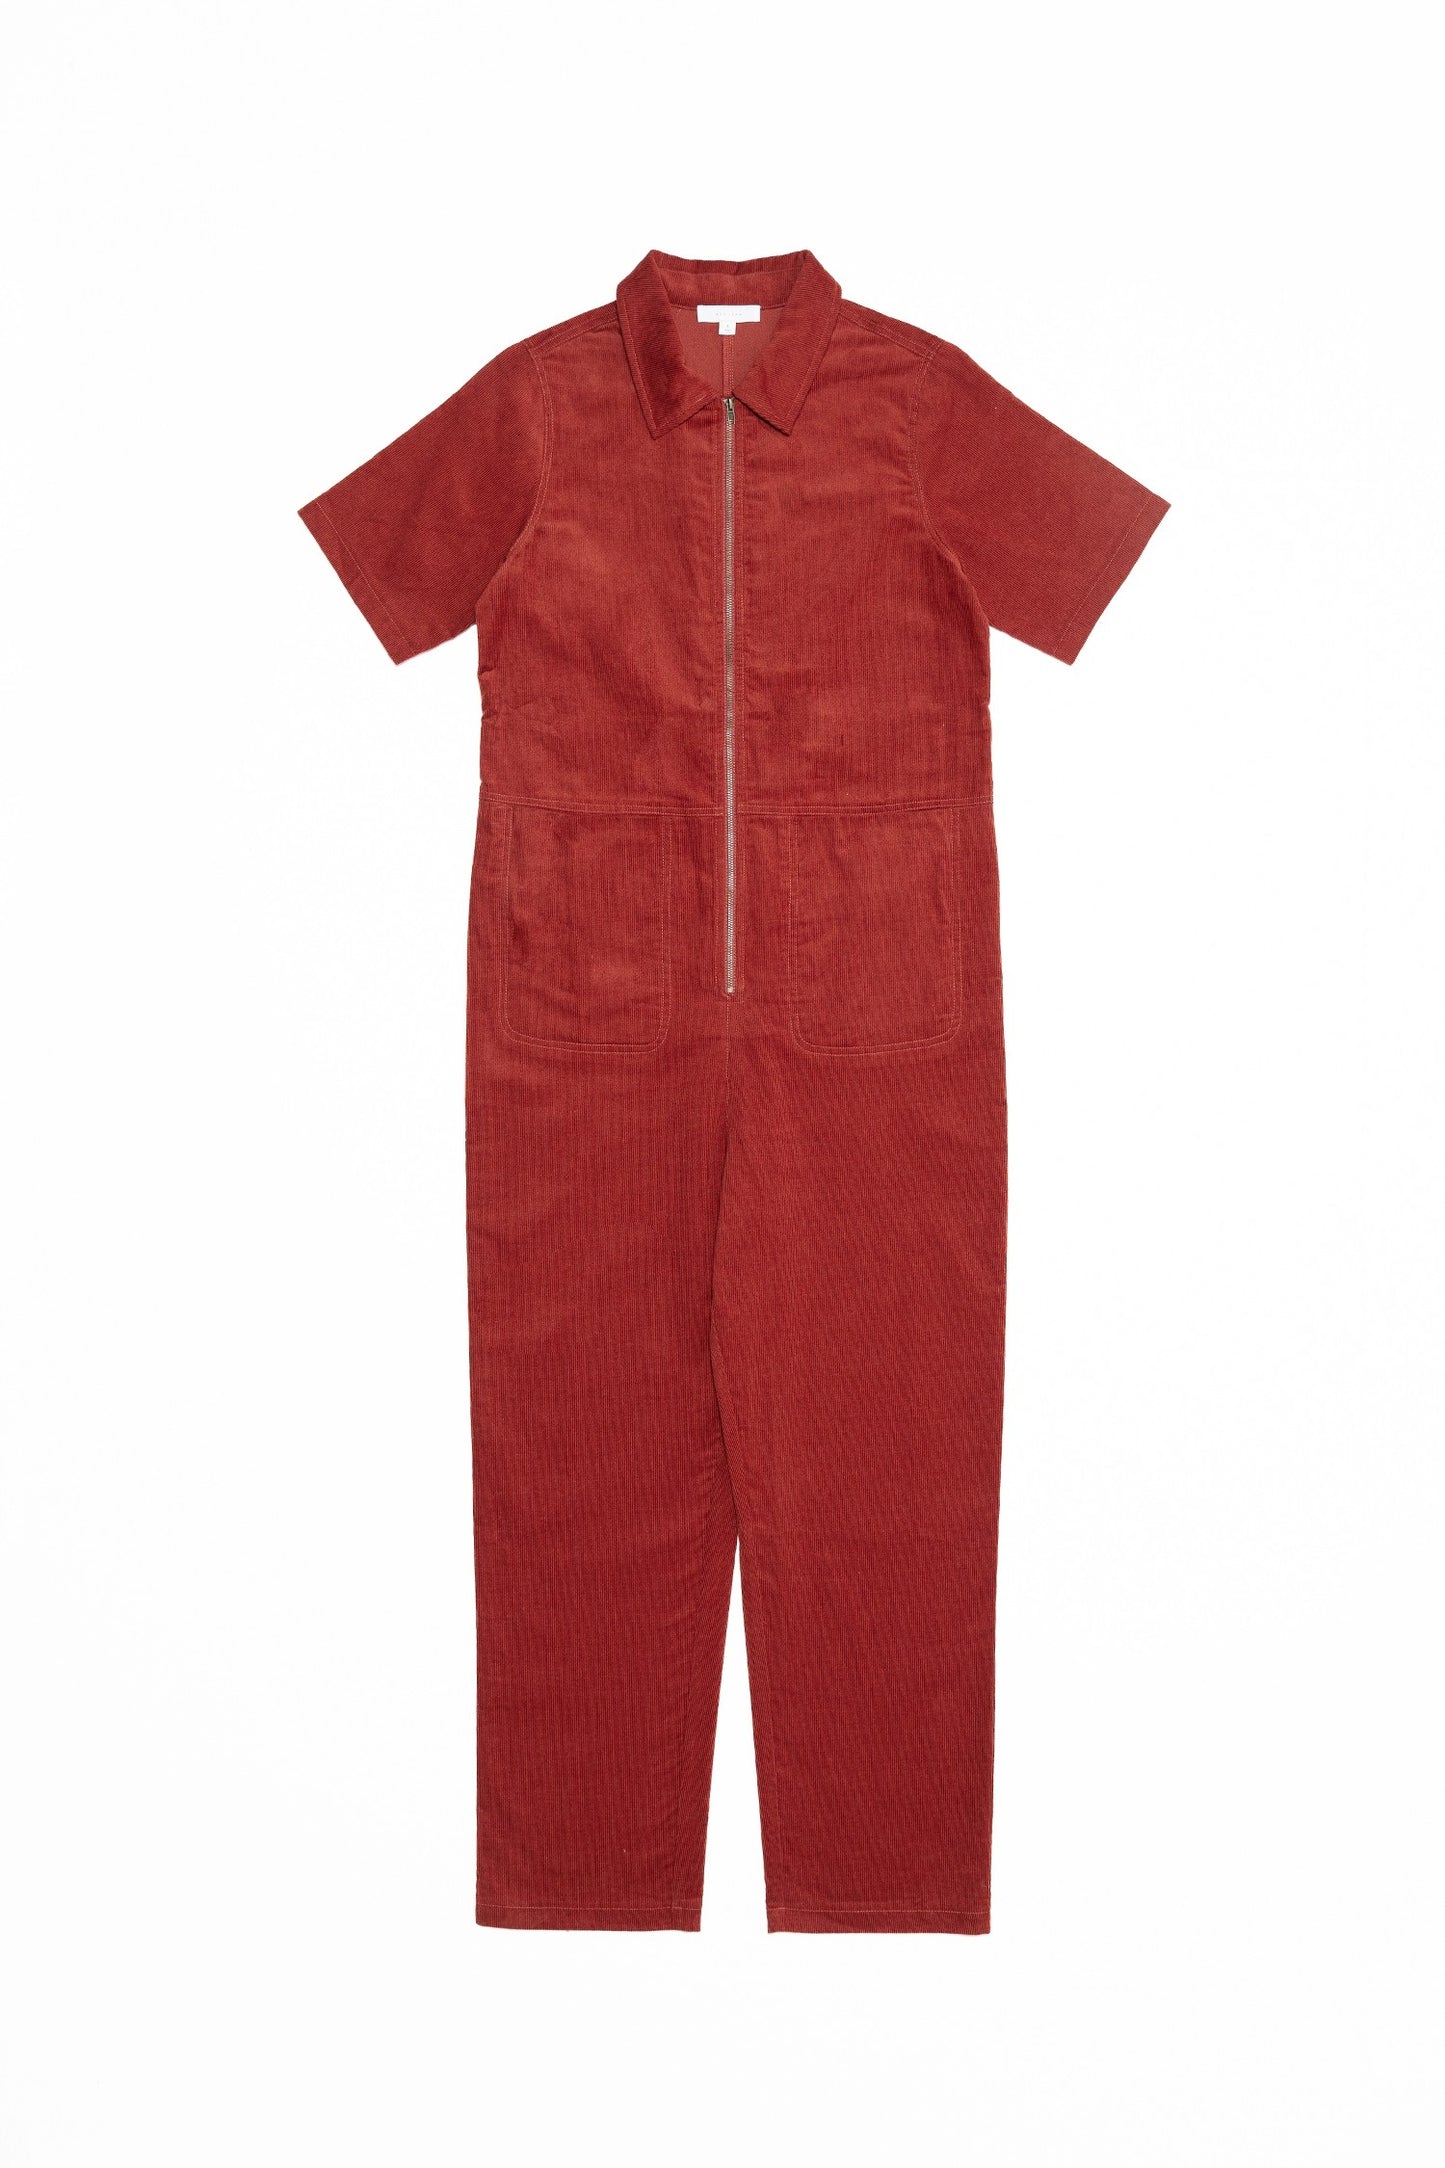 The Colby Jumpsuit